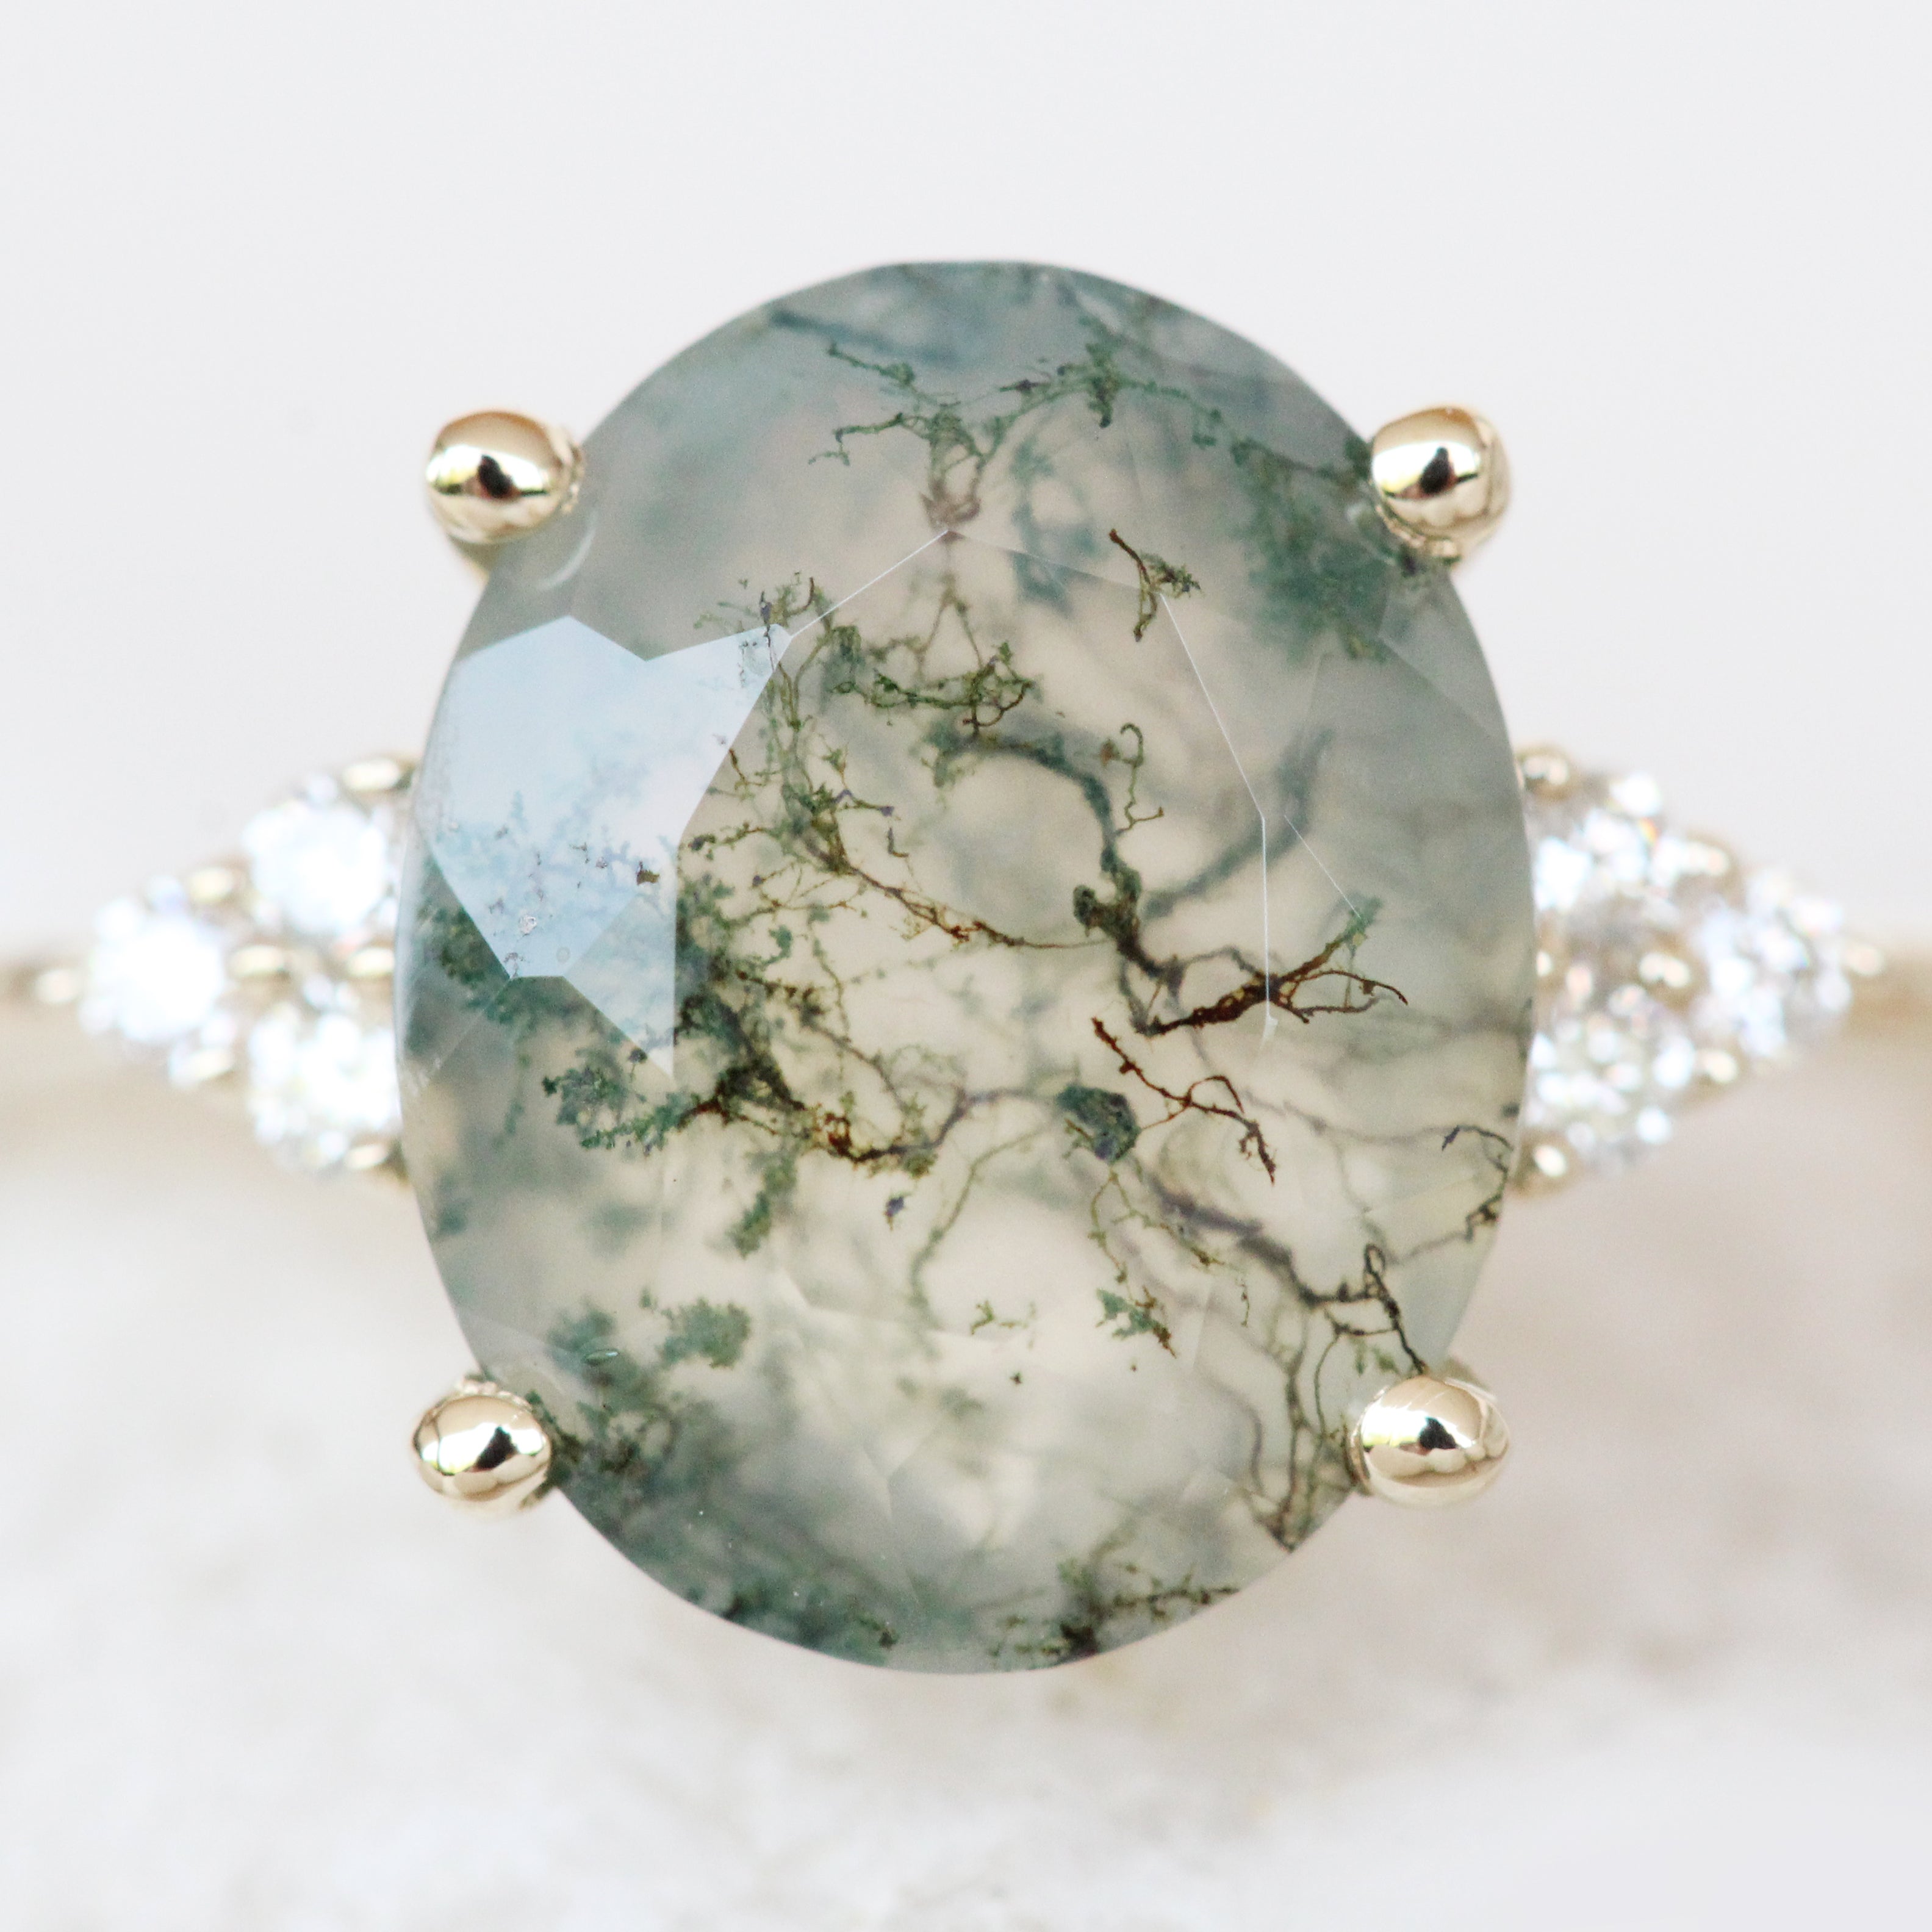 Imogene Ring with an Oval Moss Agate and White Accent Diamonds - Made to Order - Each Stone is Unique - Midwinter Co. Alternative Bridal Rings and Modern Fine Jewelry